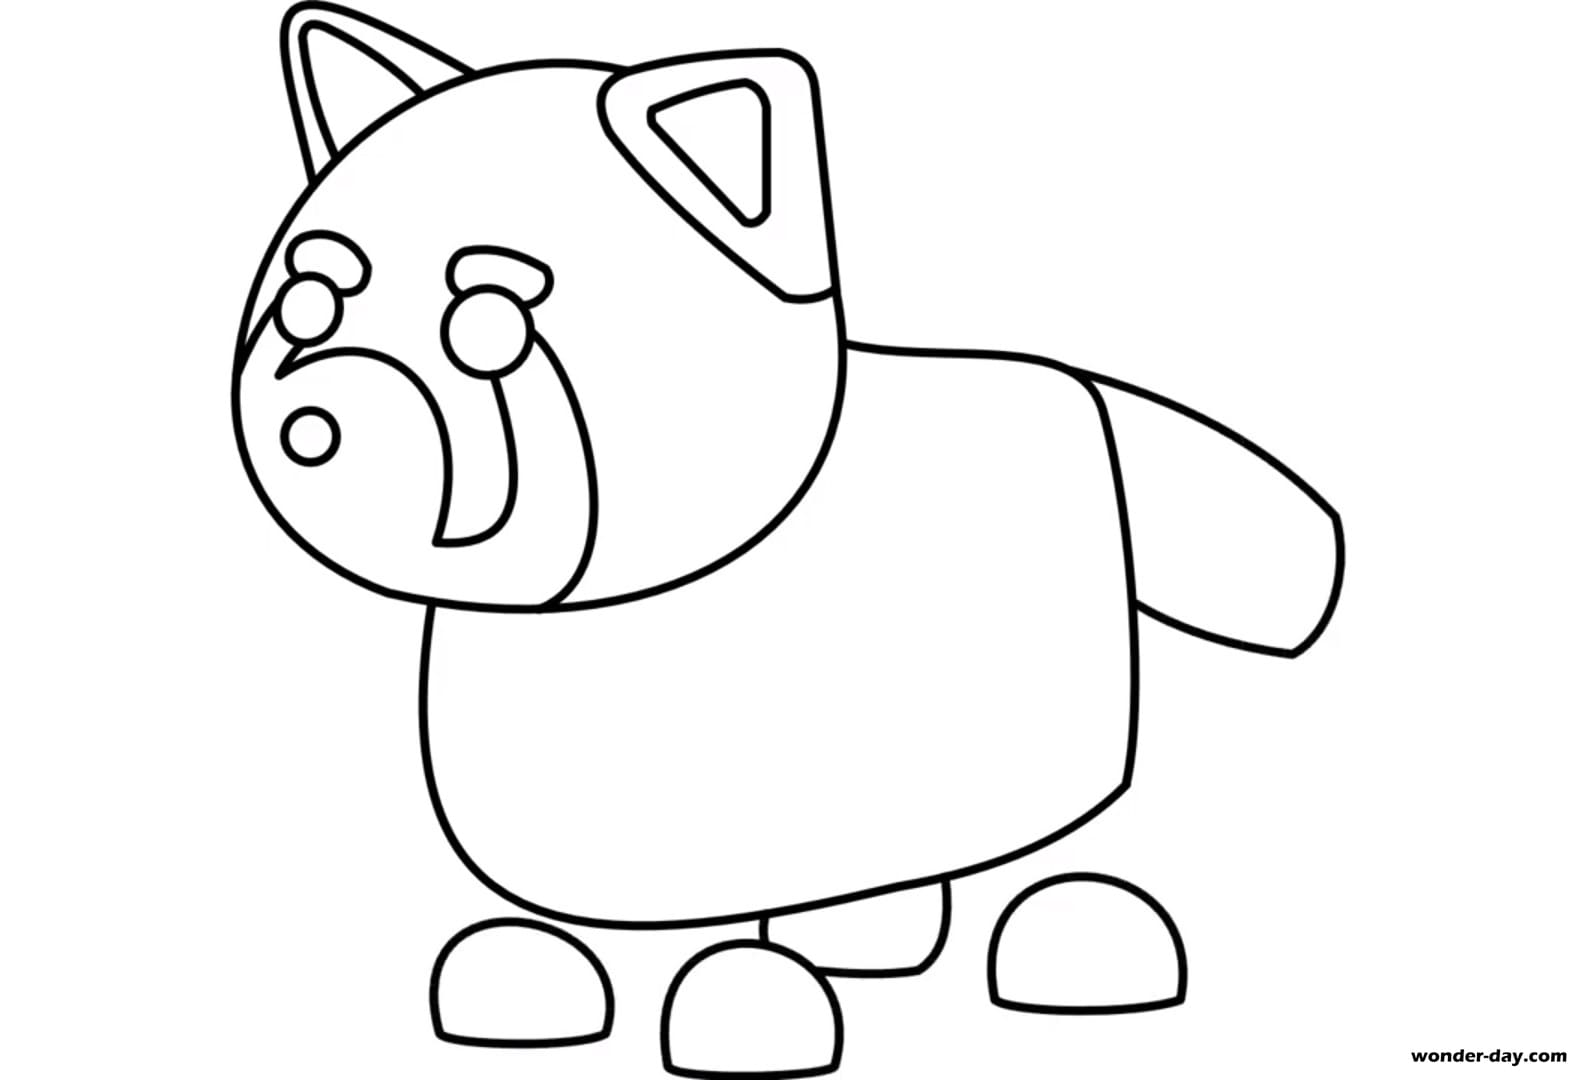 Coloring Pages Adopt Me Print For Free Wonder Day Com - roblox adopt me coloring pages panda